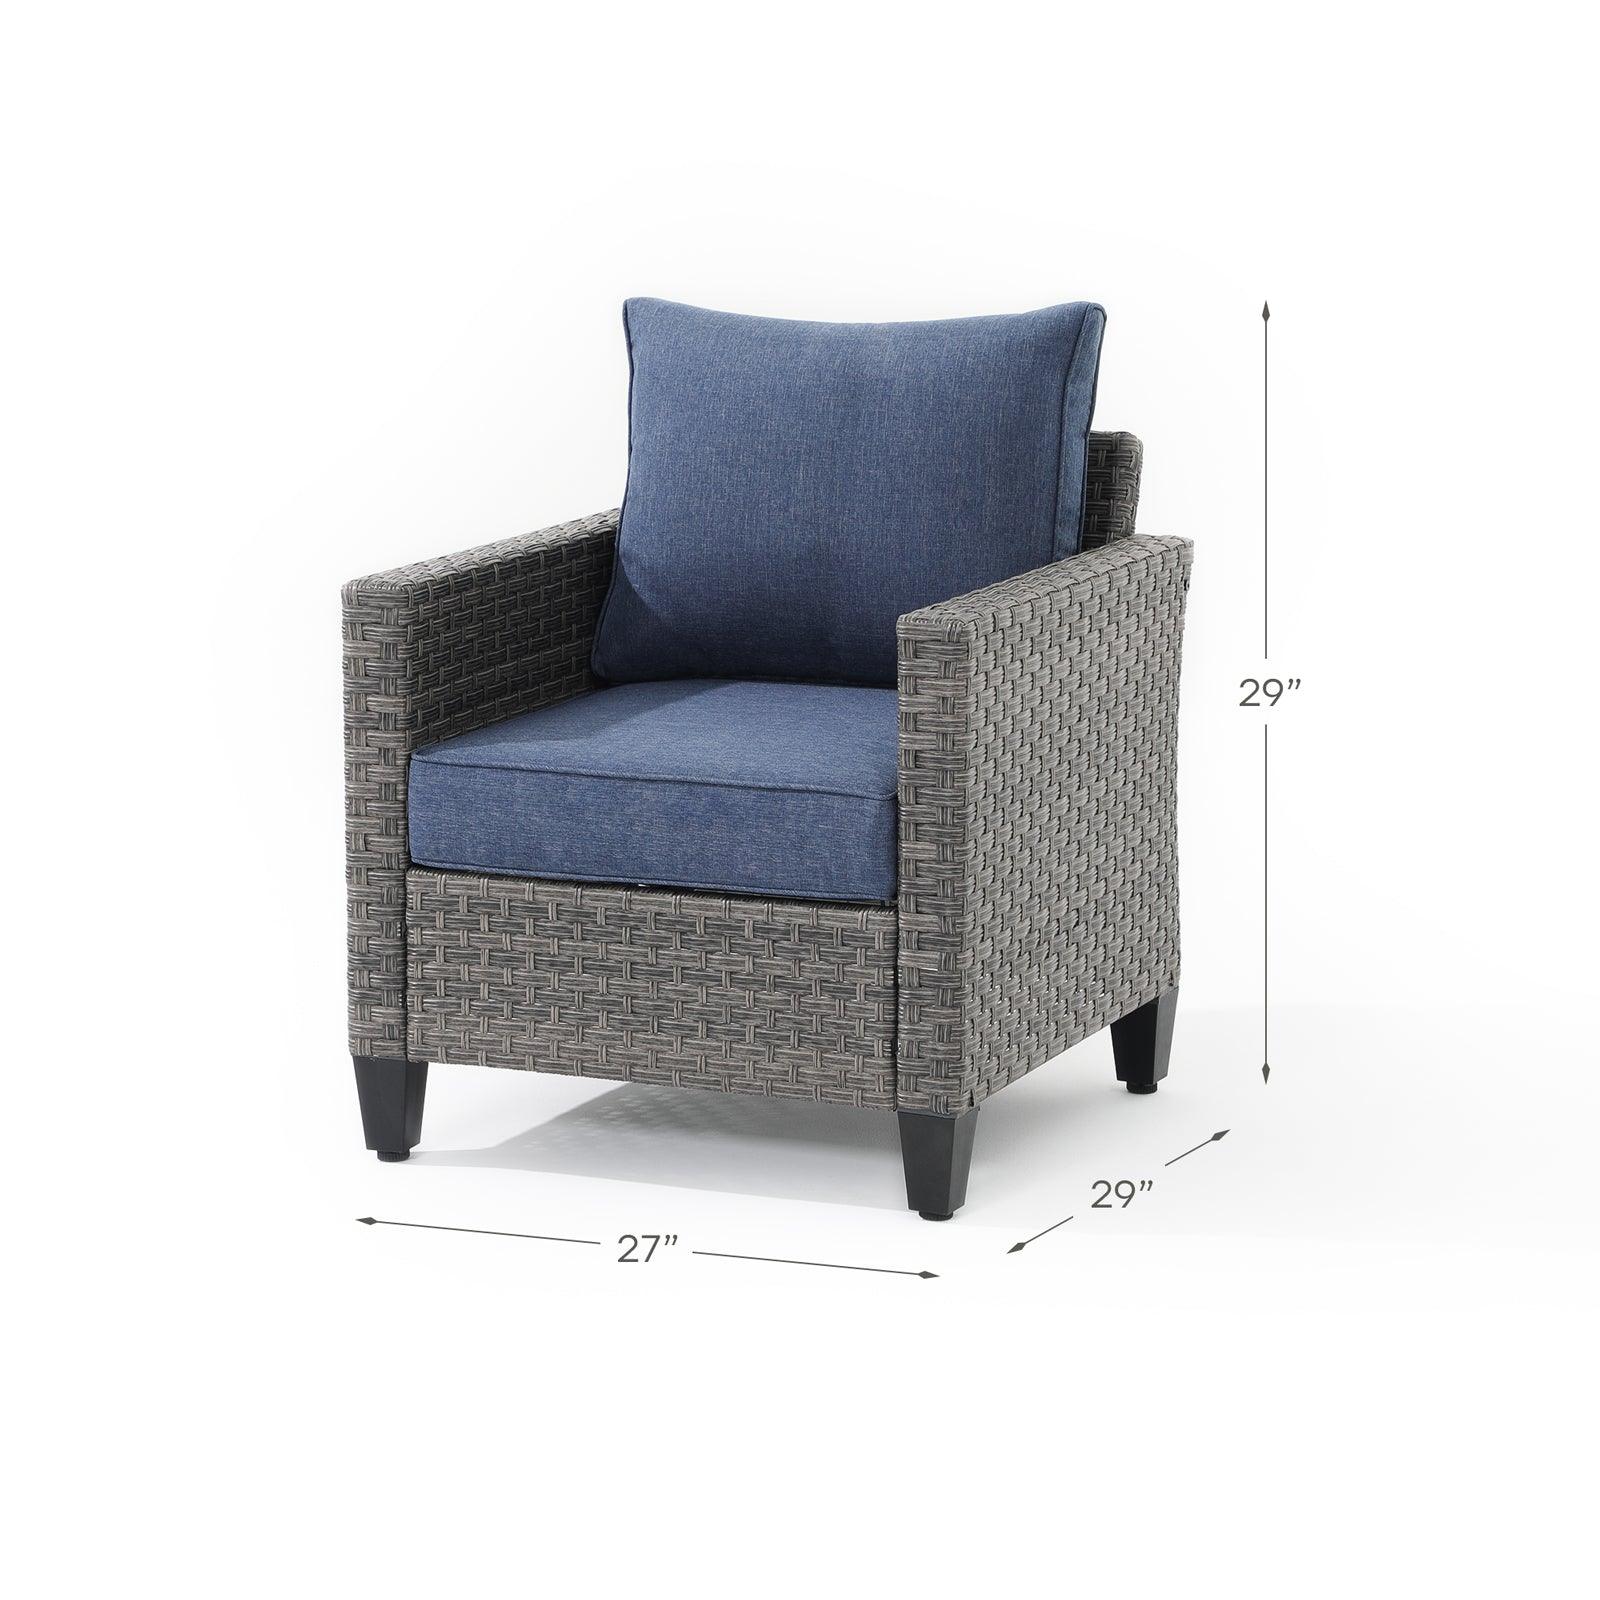 Ayia lounge chair with grey rattan design, navy blue cushions, dimension information  - Jardina Furniture #color_Navy blue